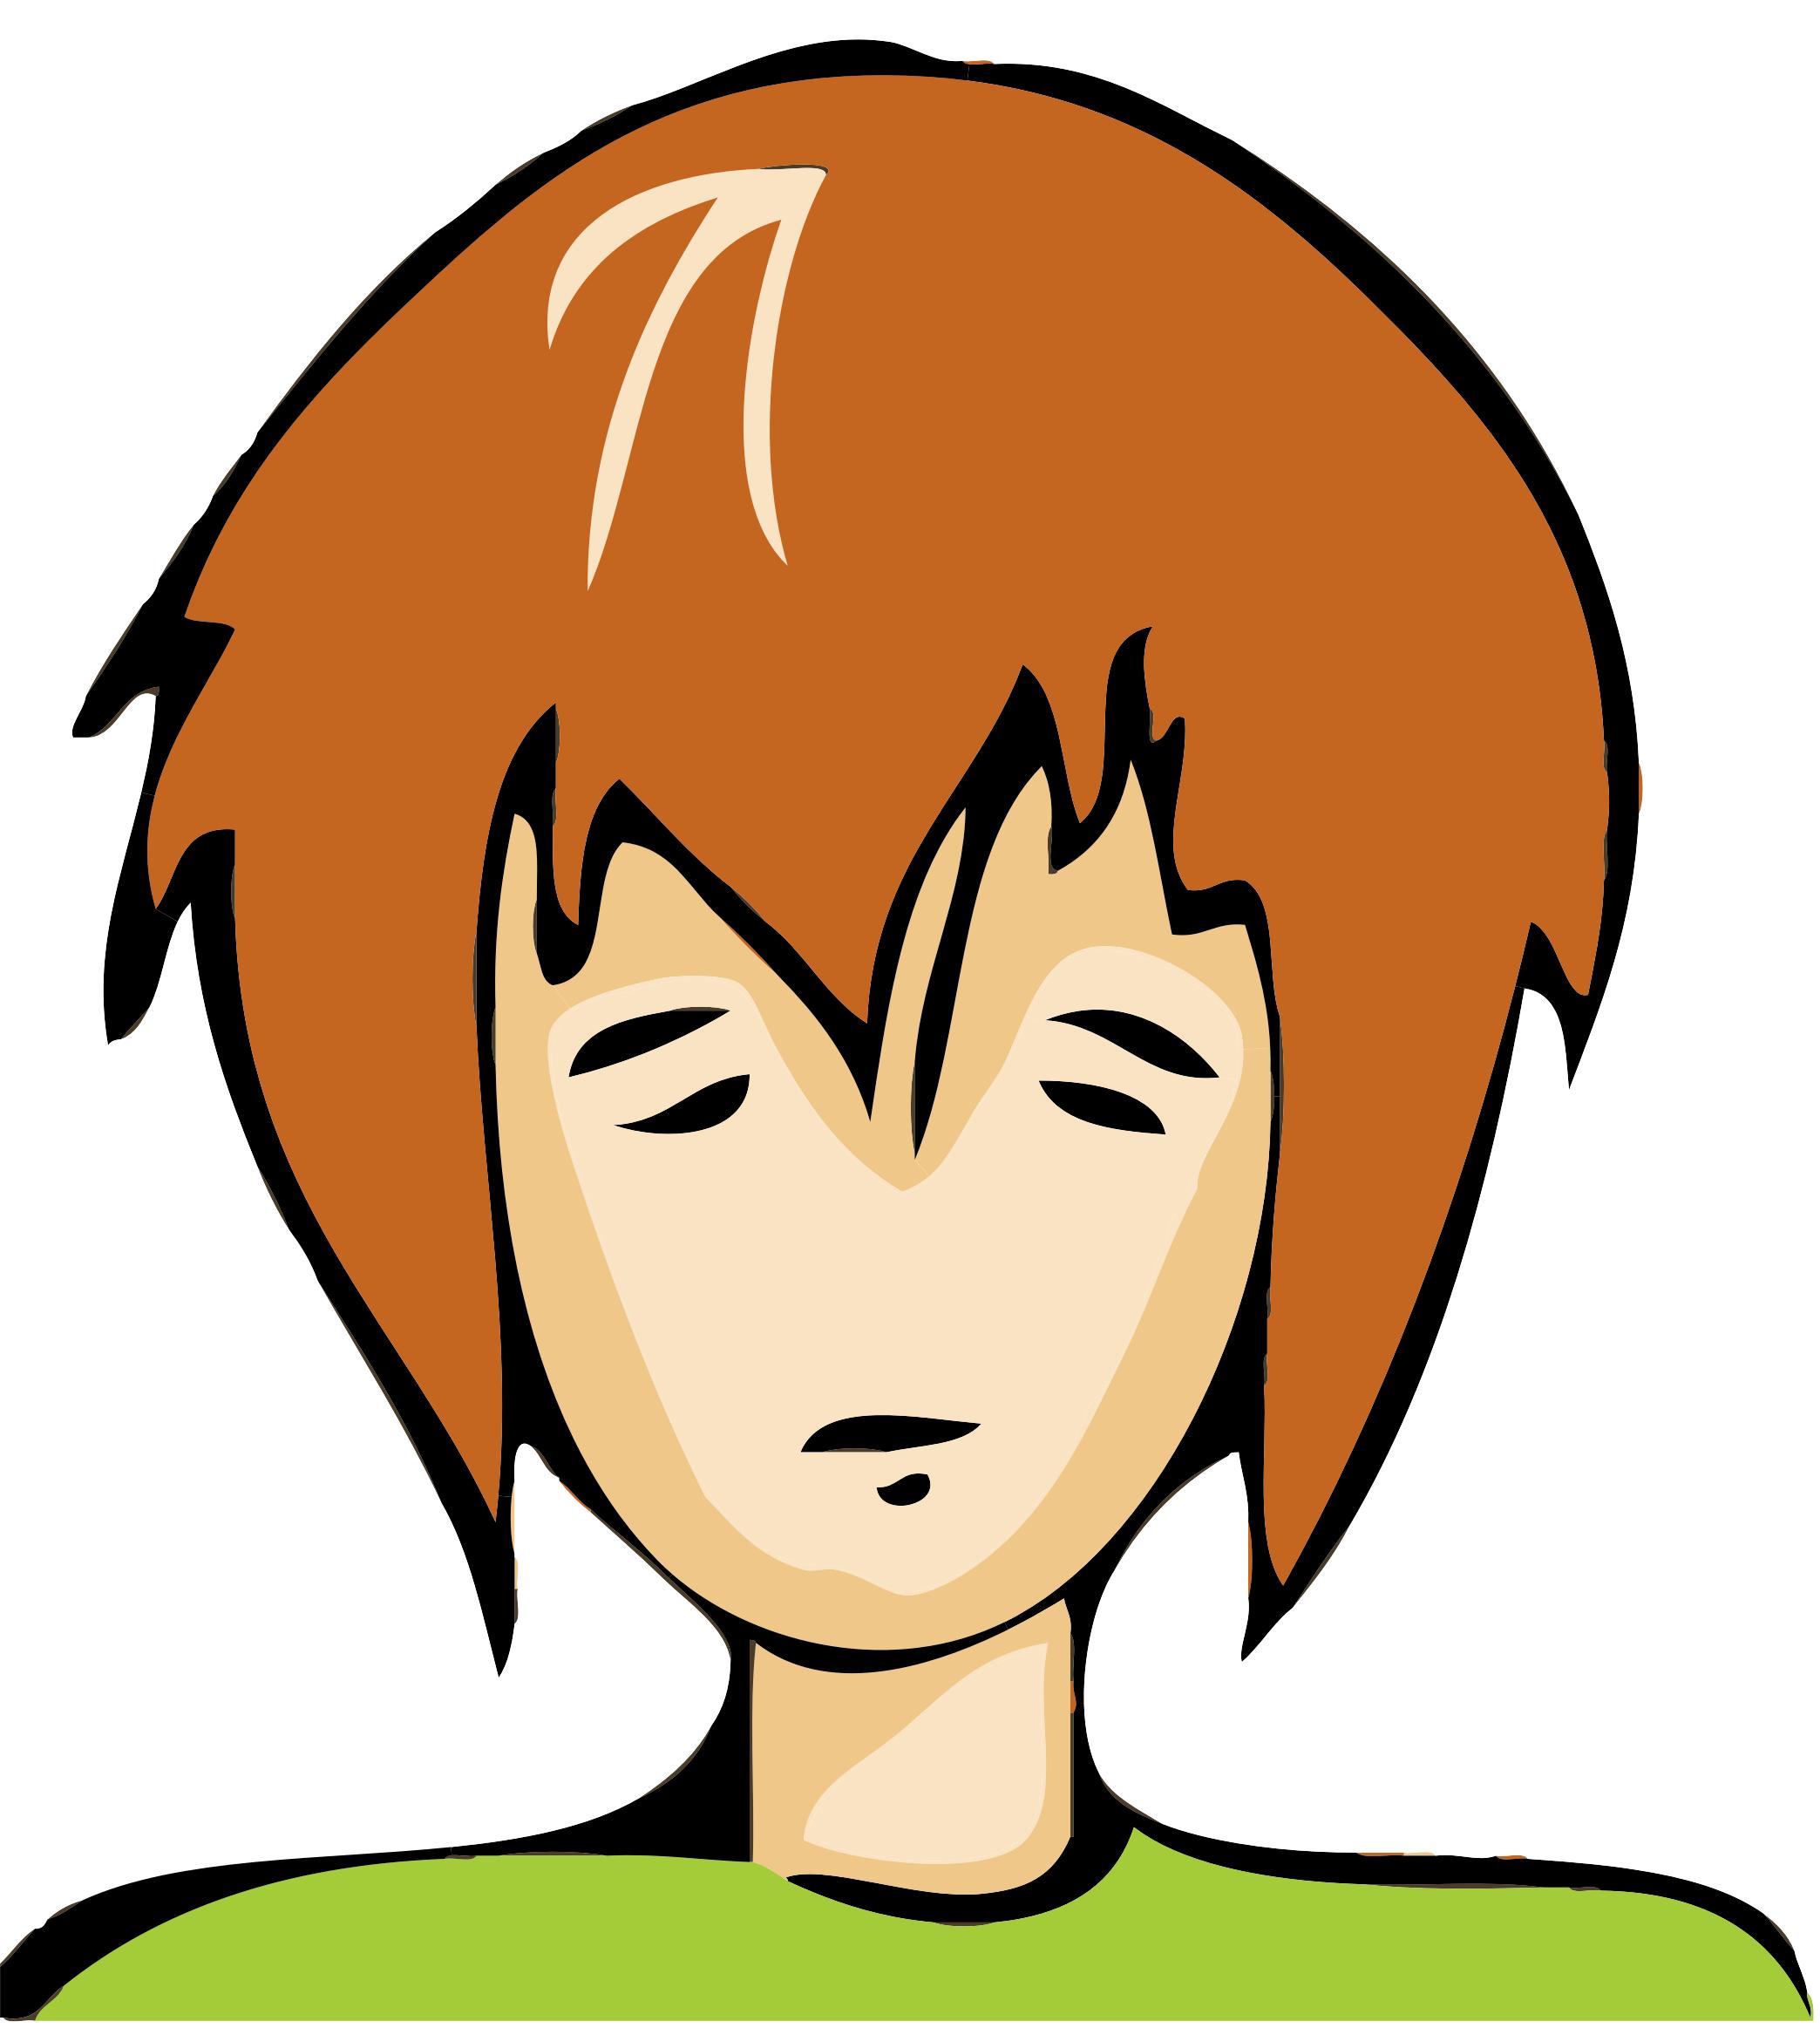 Bad Day Avatar png